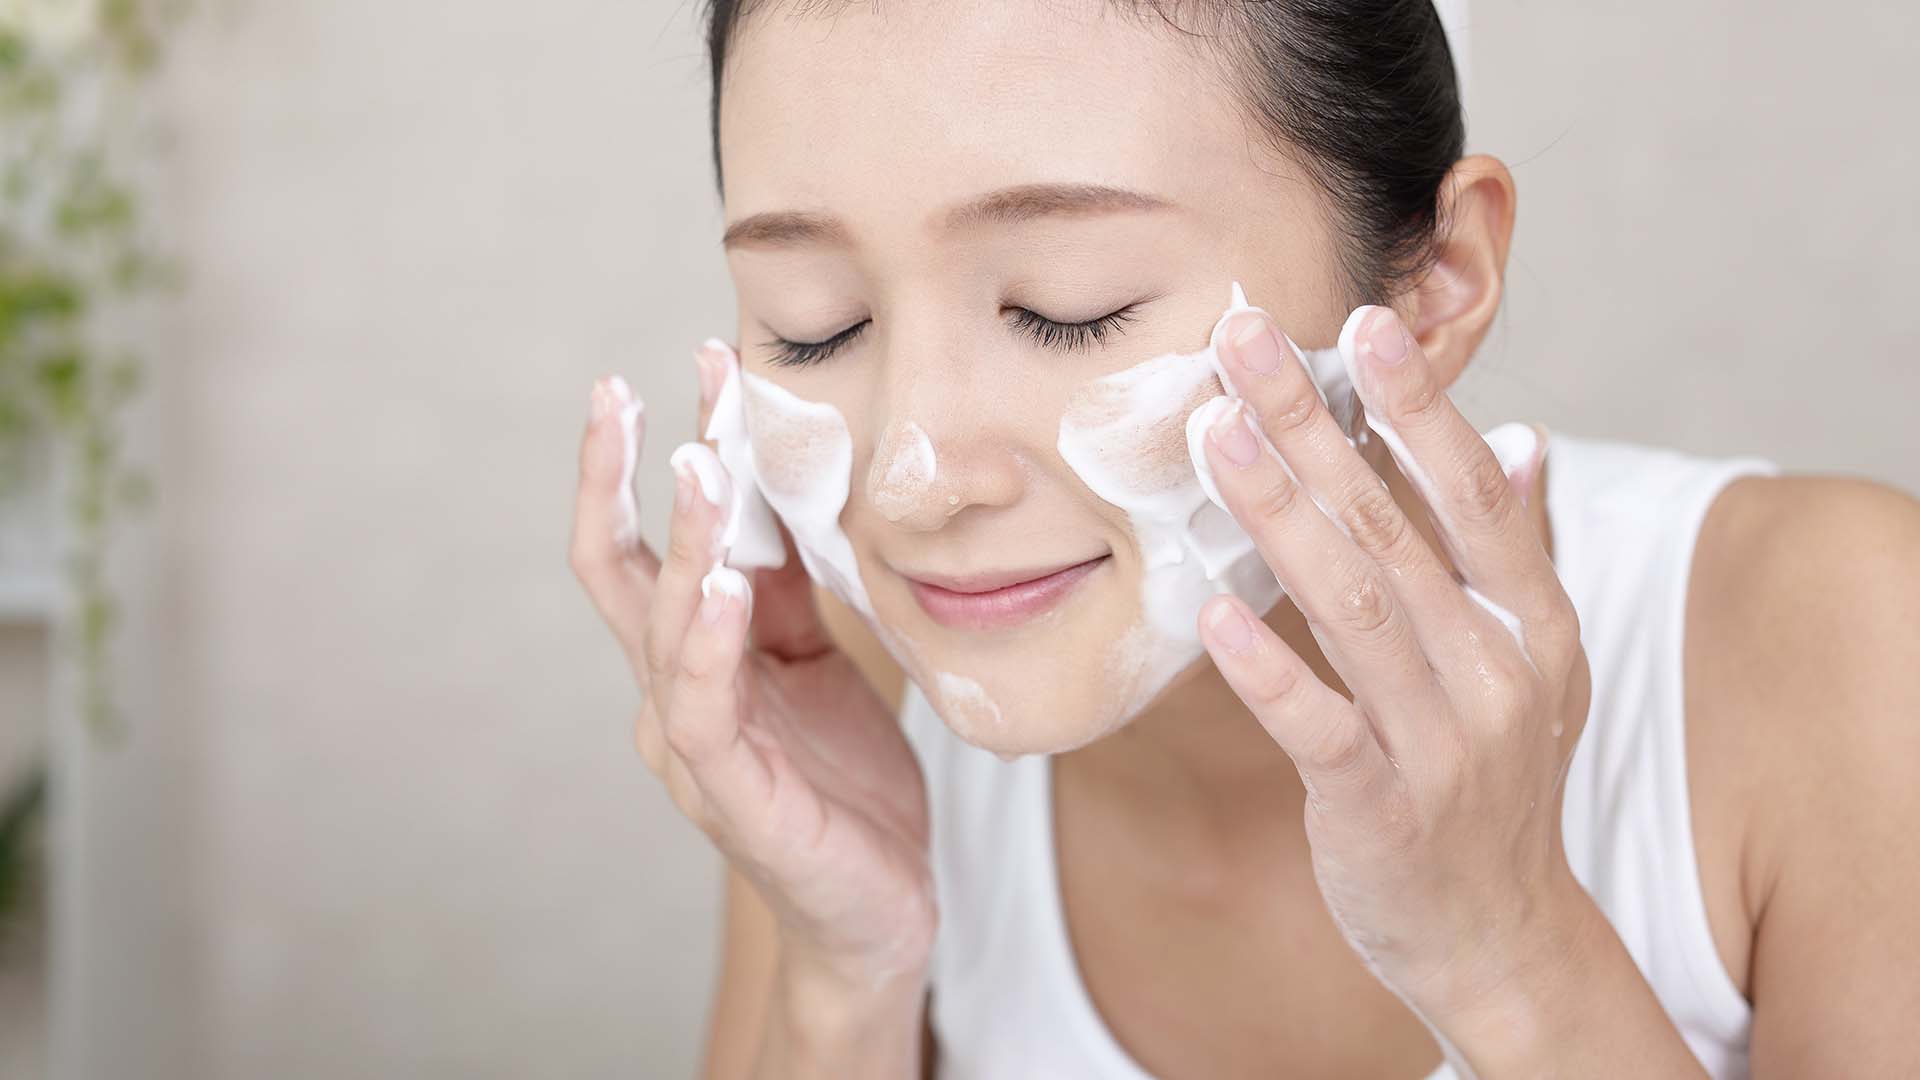 Cleansing, toning and moisturizing are important for skin